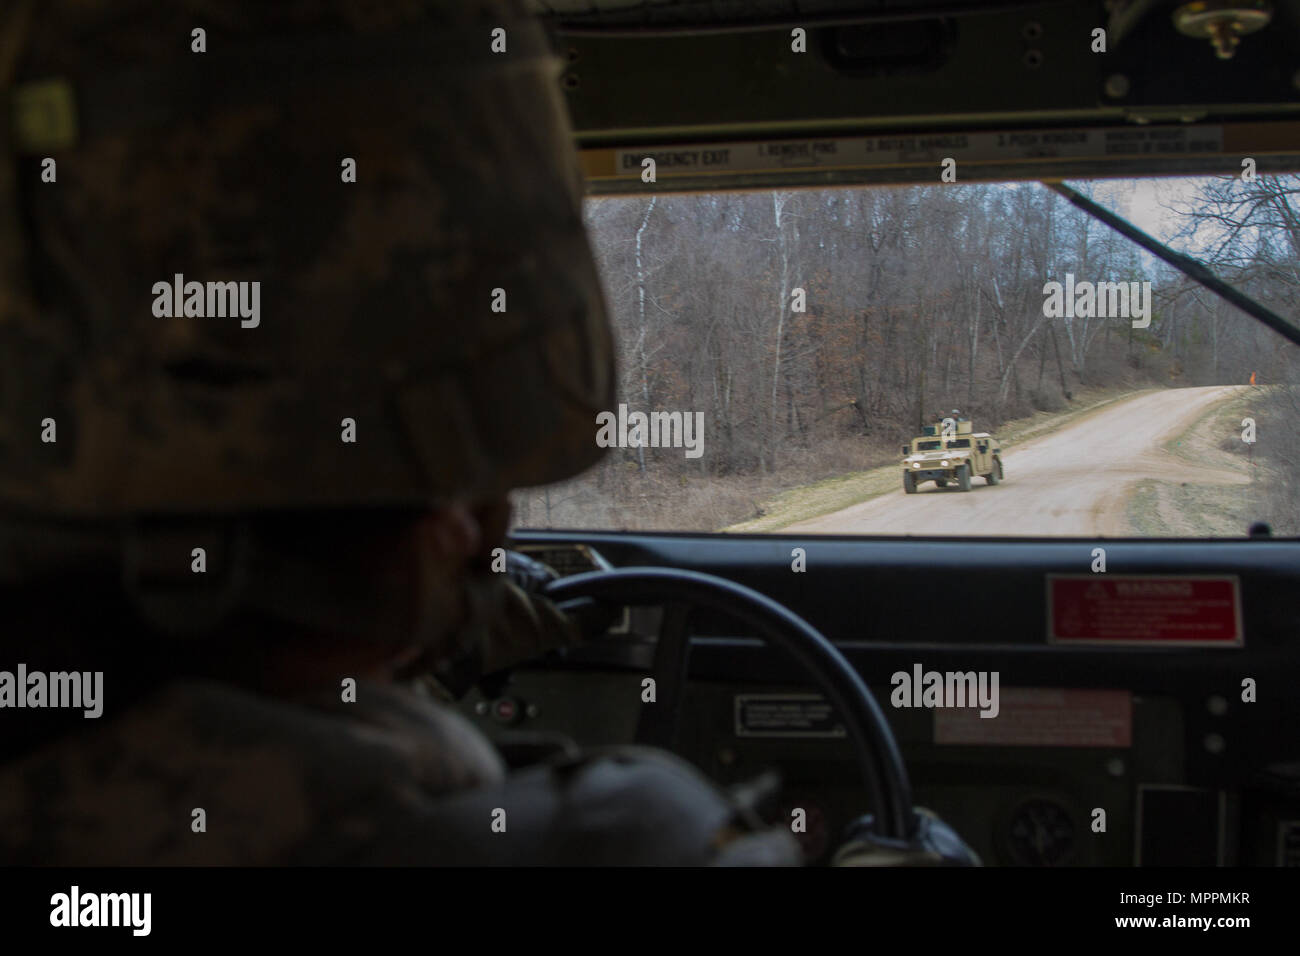 US Army Spc. Jessica Taylor, a civil affairs specialist with the 364th Civil Affairs Brigade, 351st Civil Affairs Command, maneuvers a Humvee during a firing exercise as part of Operation Cold Steel at Fort McCoy, Wis., on April 02, 2017. The 351st CACOM is responsible for strategic operations through tactical civil affairs support across the U.S. Pacific Command area of responsibility. Operation Cold Steel is the U.S. Army Reserve’s crew-served weapons qualification and validation exercise to ensure that America’s Army Reserve units and Soldiers are trained and ready to deploy on short-notice Stock Photo